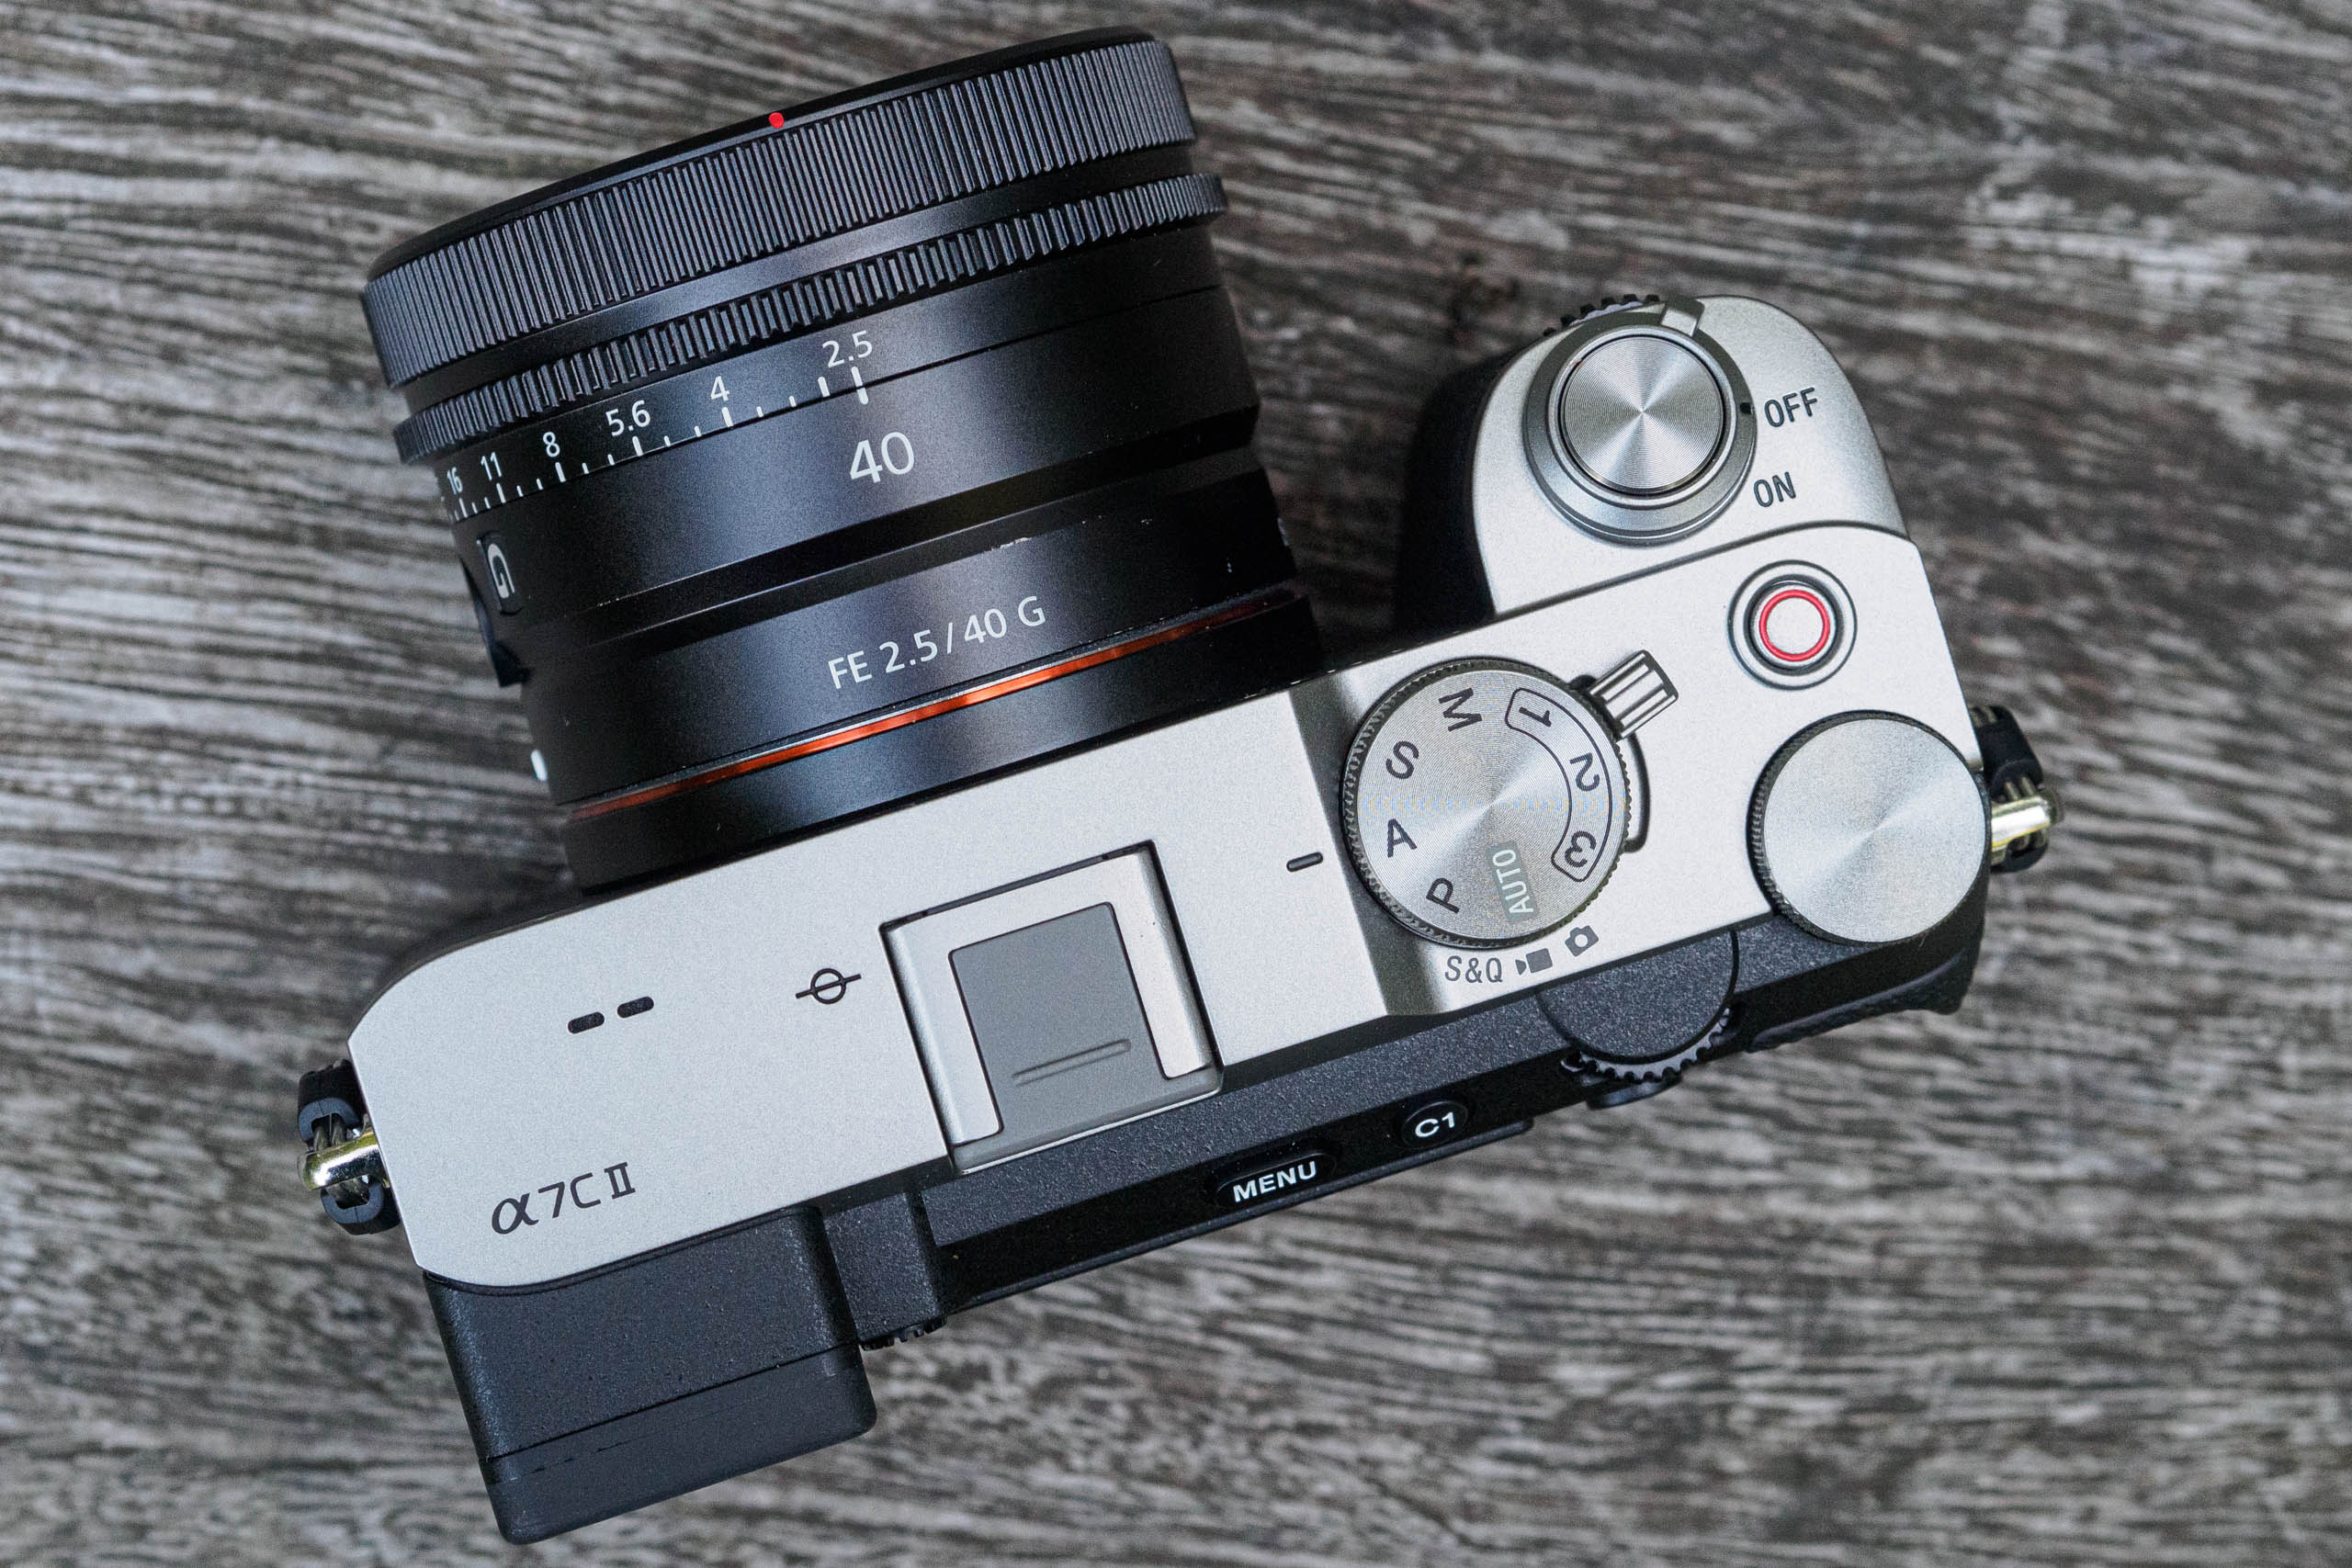 Sony A7C Review: An ultra-portable full-frame ILC